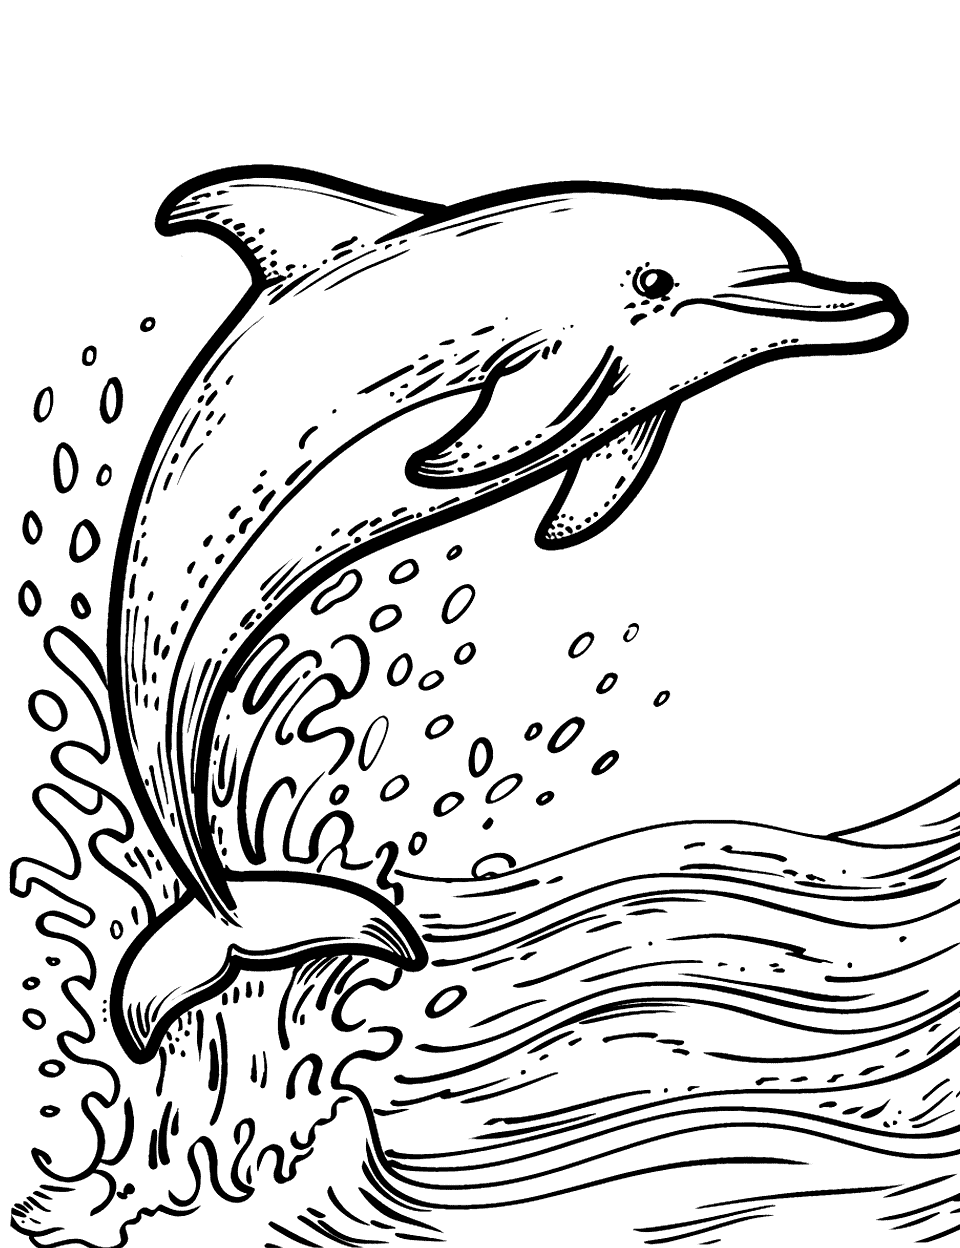 Dolphin Leaping in the Waves Sea Creature Coloring Page - A playful dolphin jumps out of the ocean waves, splashing back down.